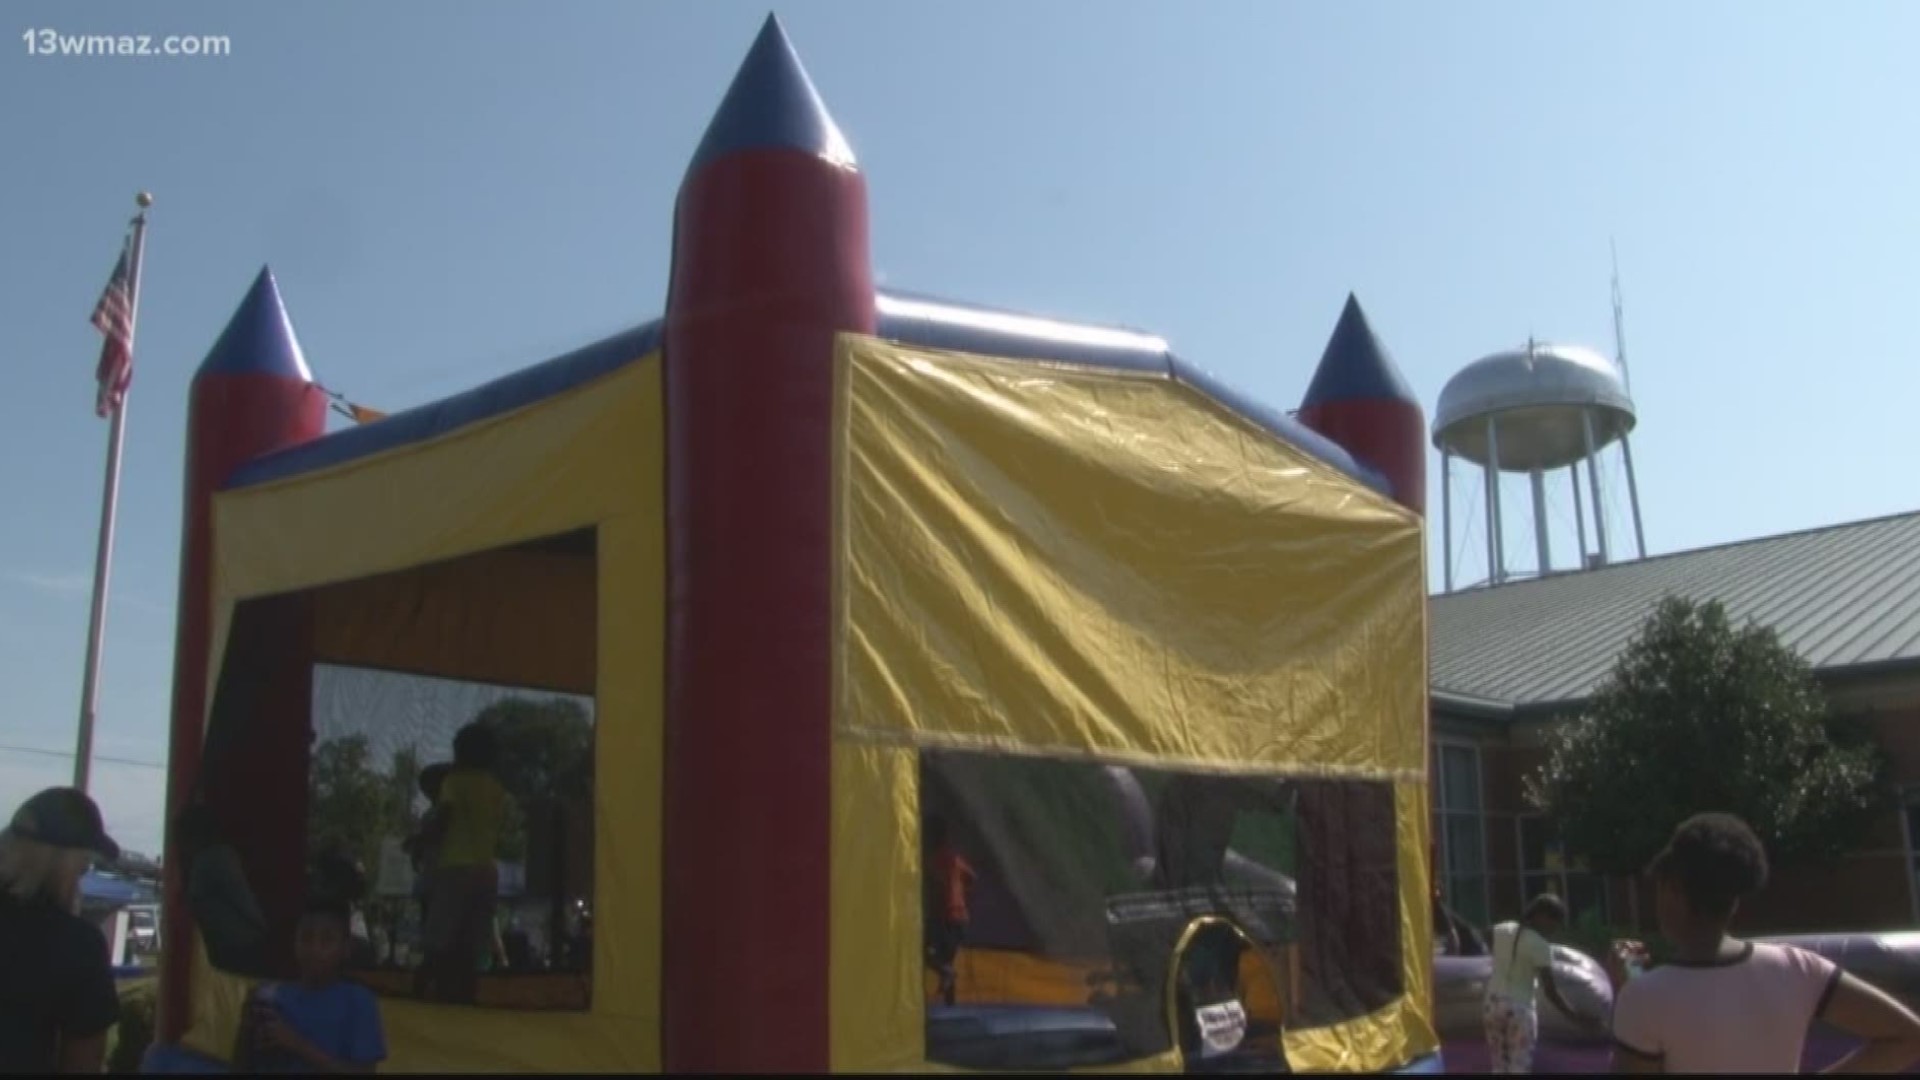 The Forsyth Police Department hosted their fourth annual Back-to-School Rally on Saturday in Monroe County. There were bounce houses, free ice cream, and of course, school supplies.